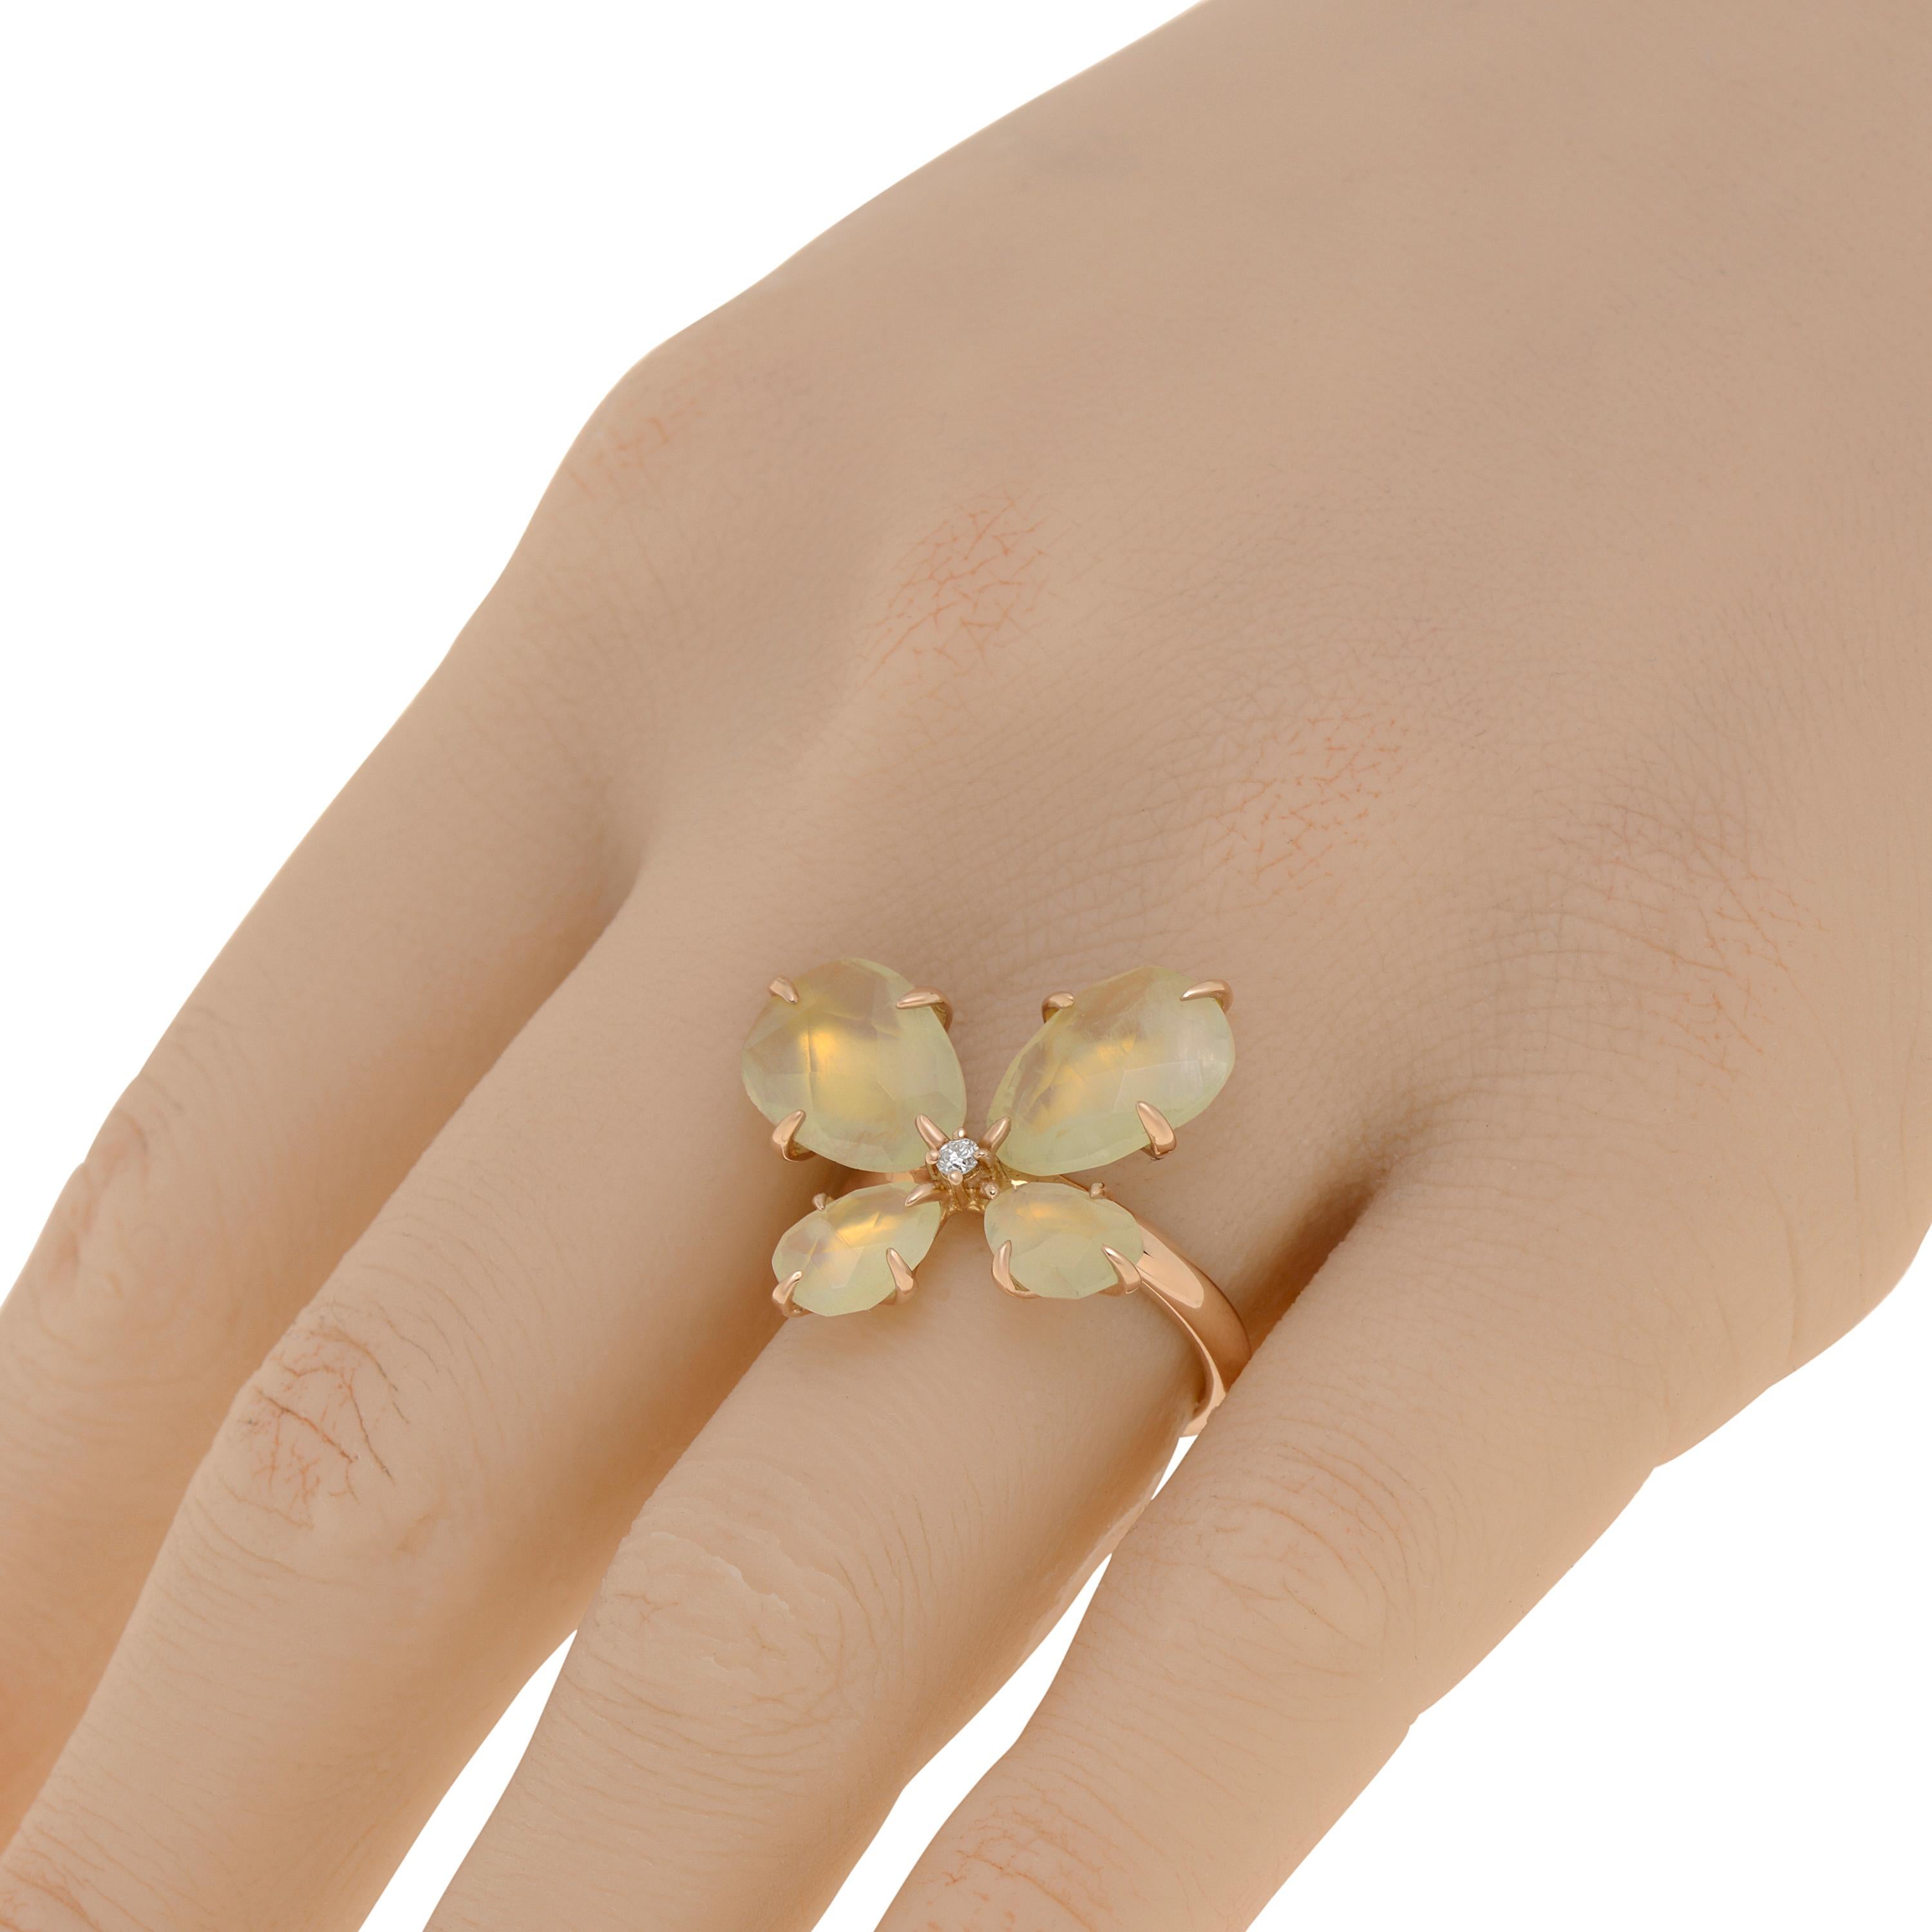 Mimi Milano 18K rose gold statement ring features an adorable butterfly design with 0.04ct. tw. diamonds and prehnite stones. The ring size is 7.25 (55). The decoration size is 7/8